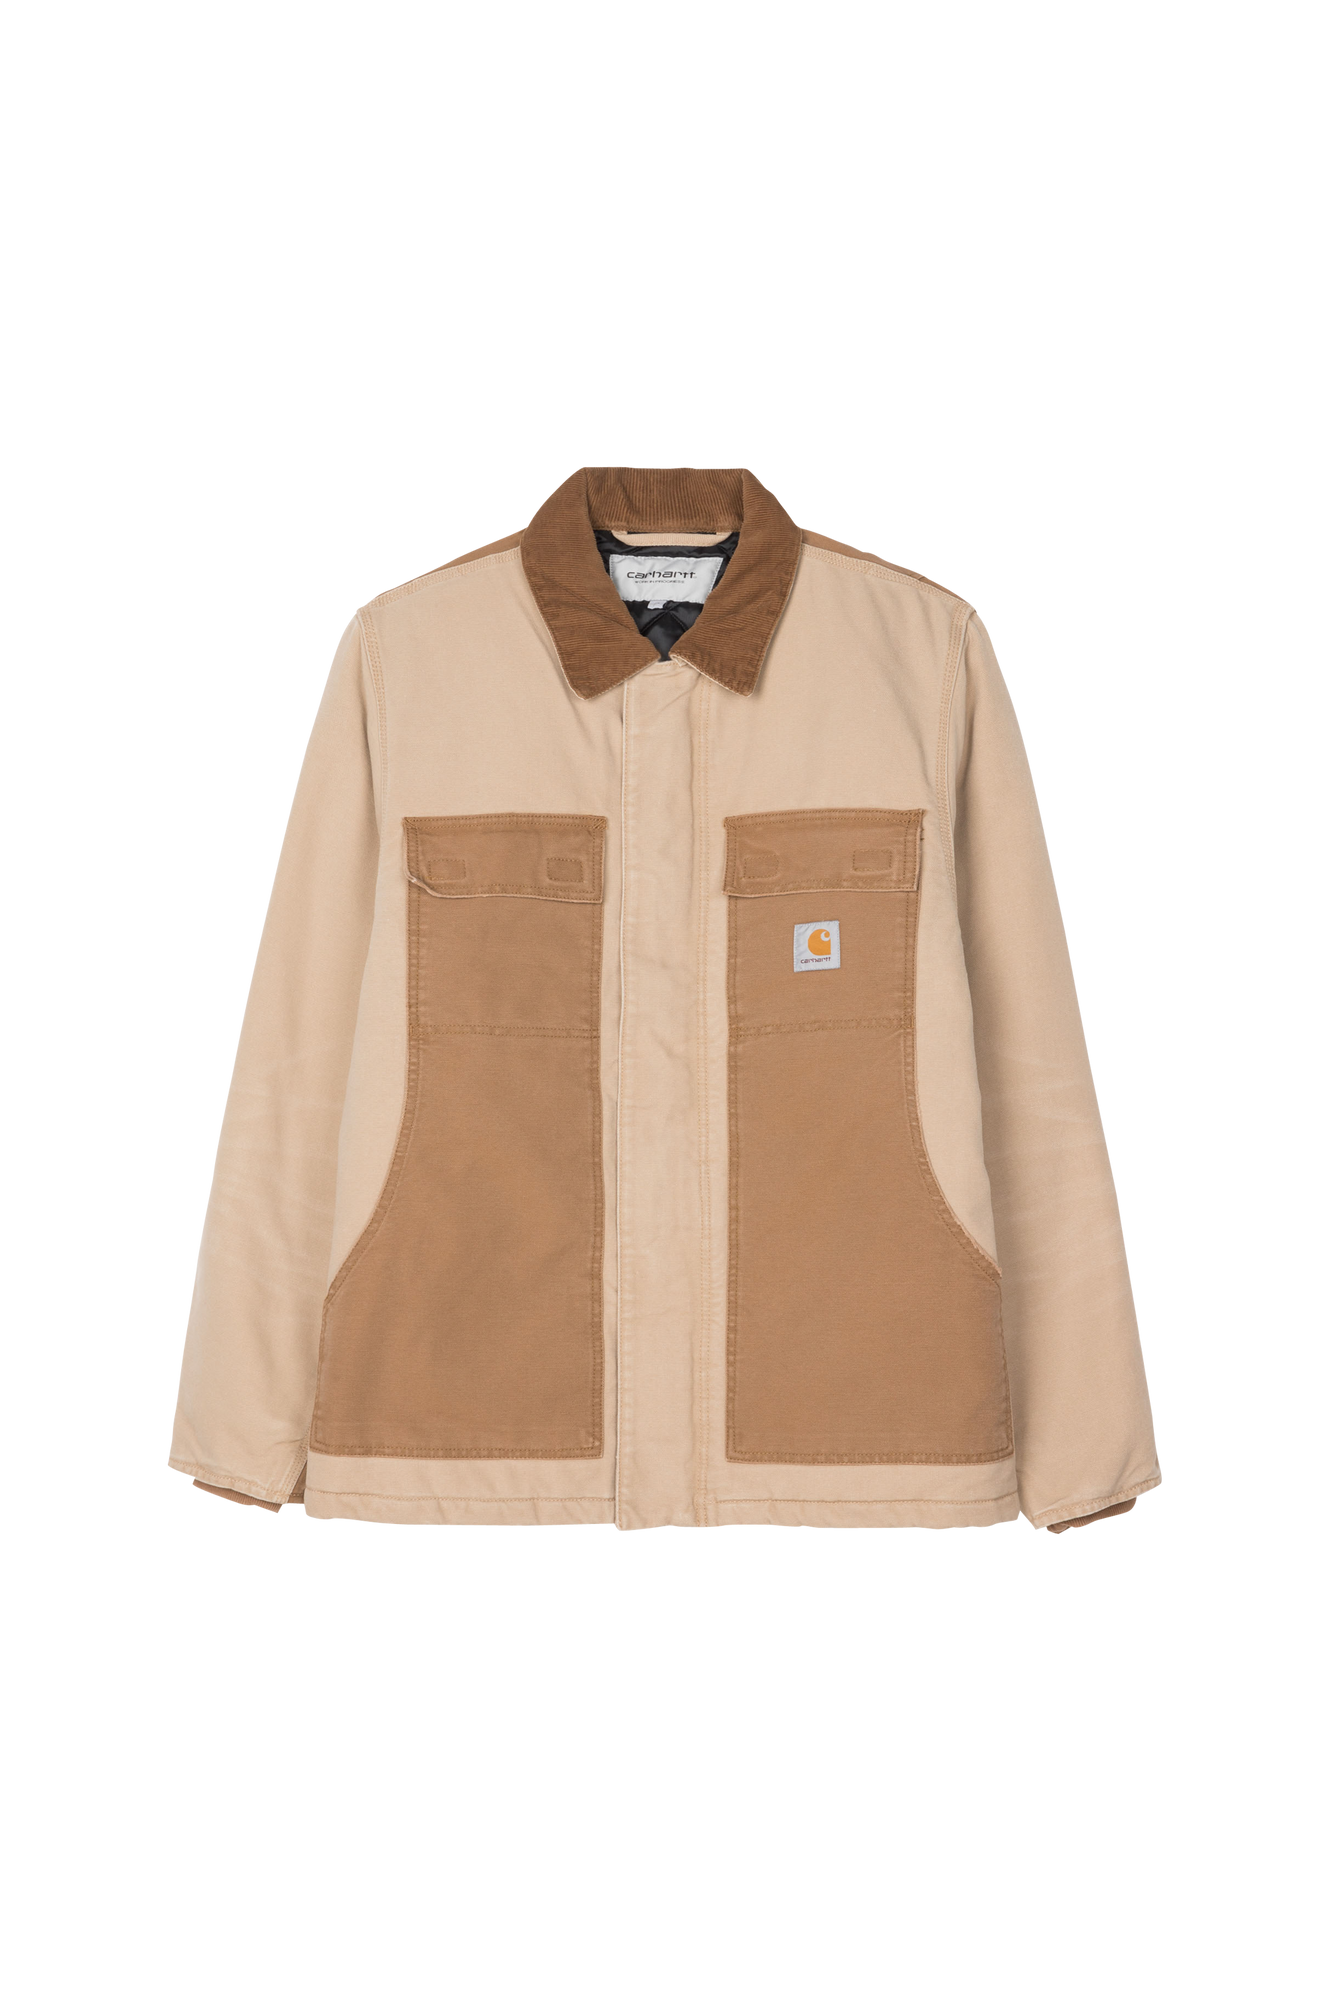 Carhartt Wip - Manteau - Taille XS